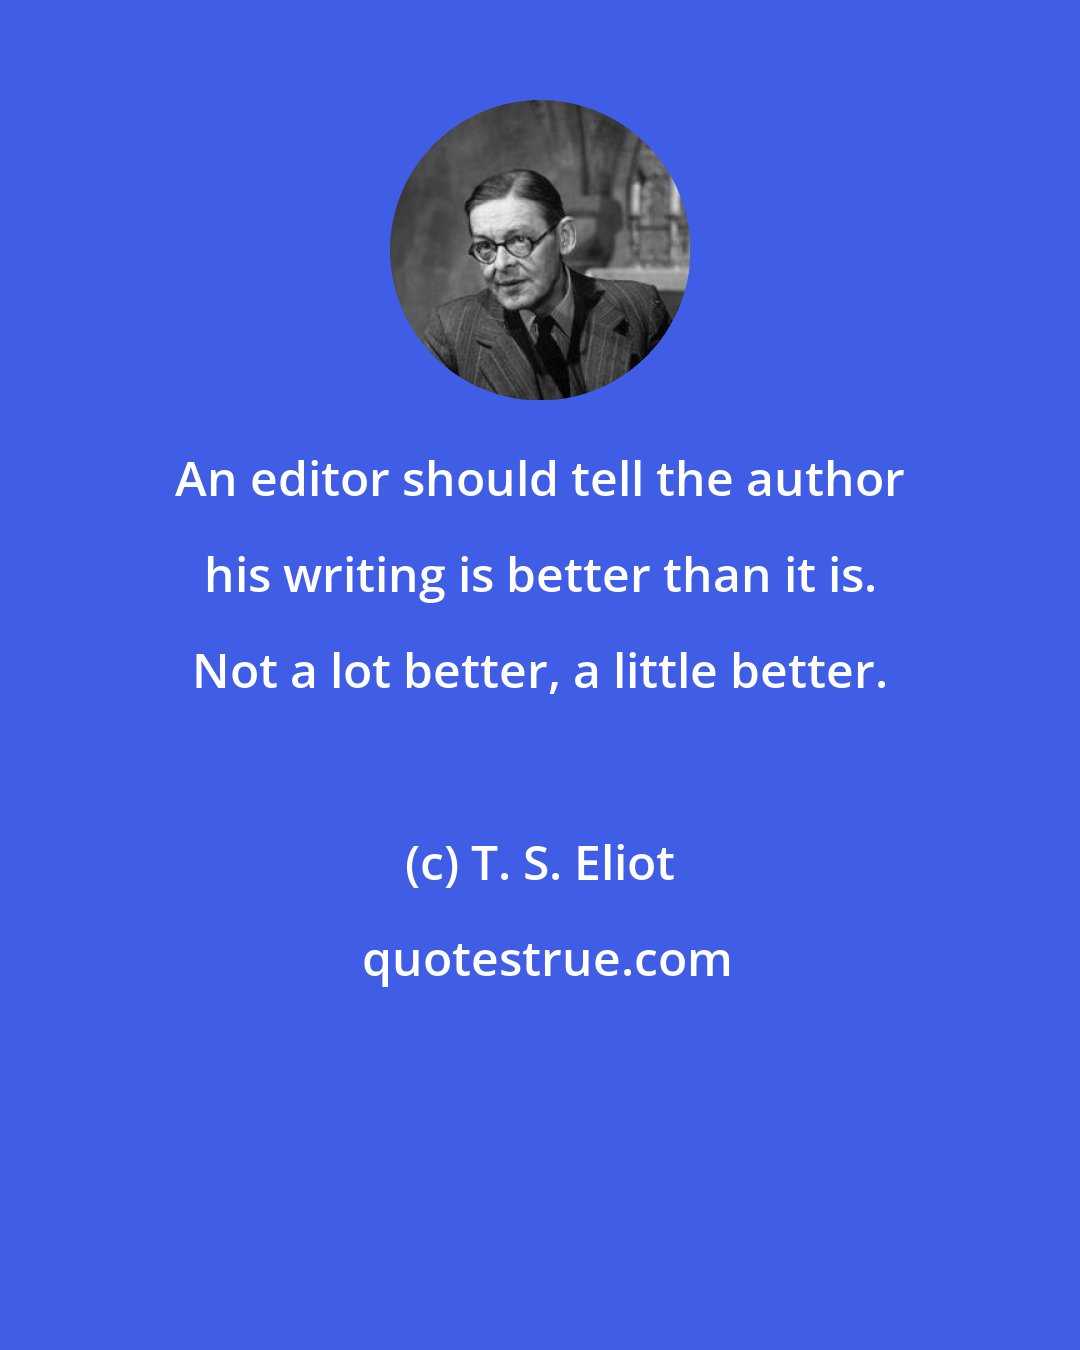 T. S. Eliot: An editor should tell the author his writing is better than it is. Not a lot better, a little better.